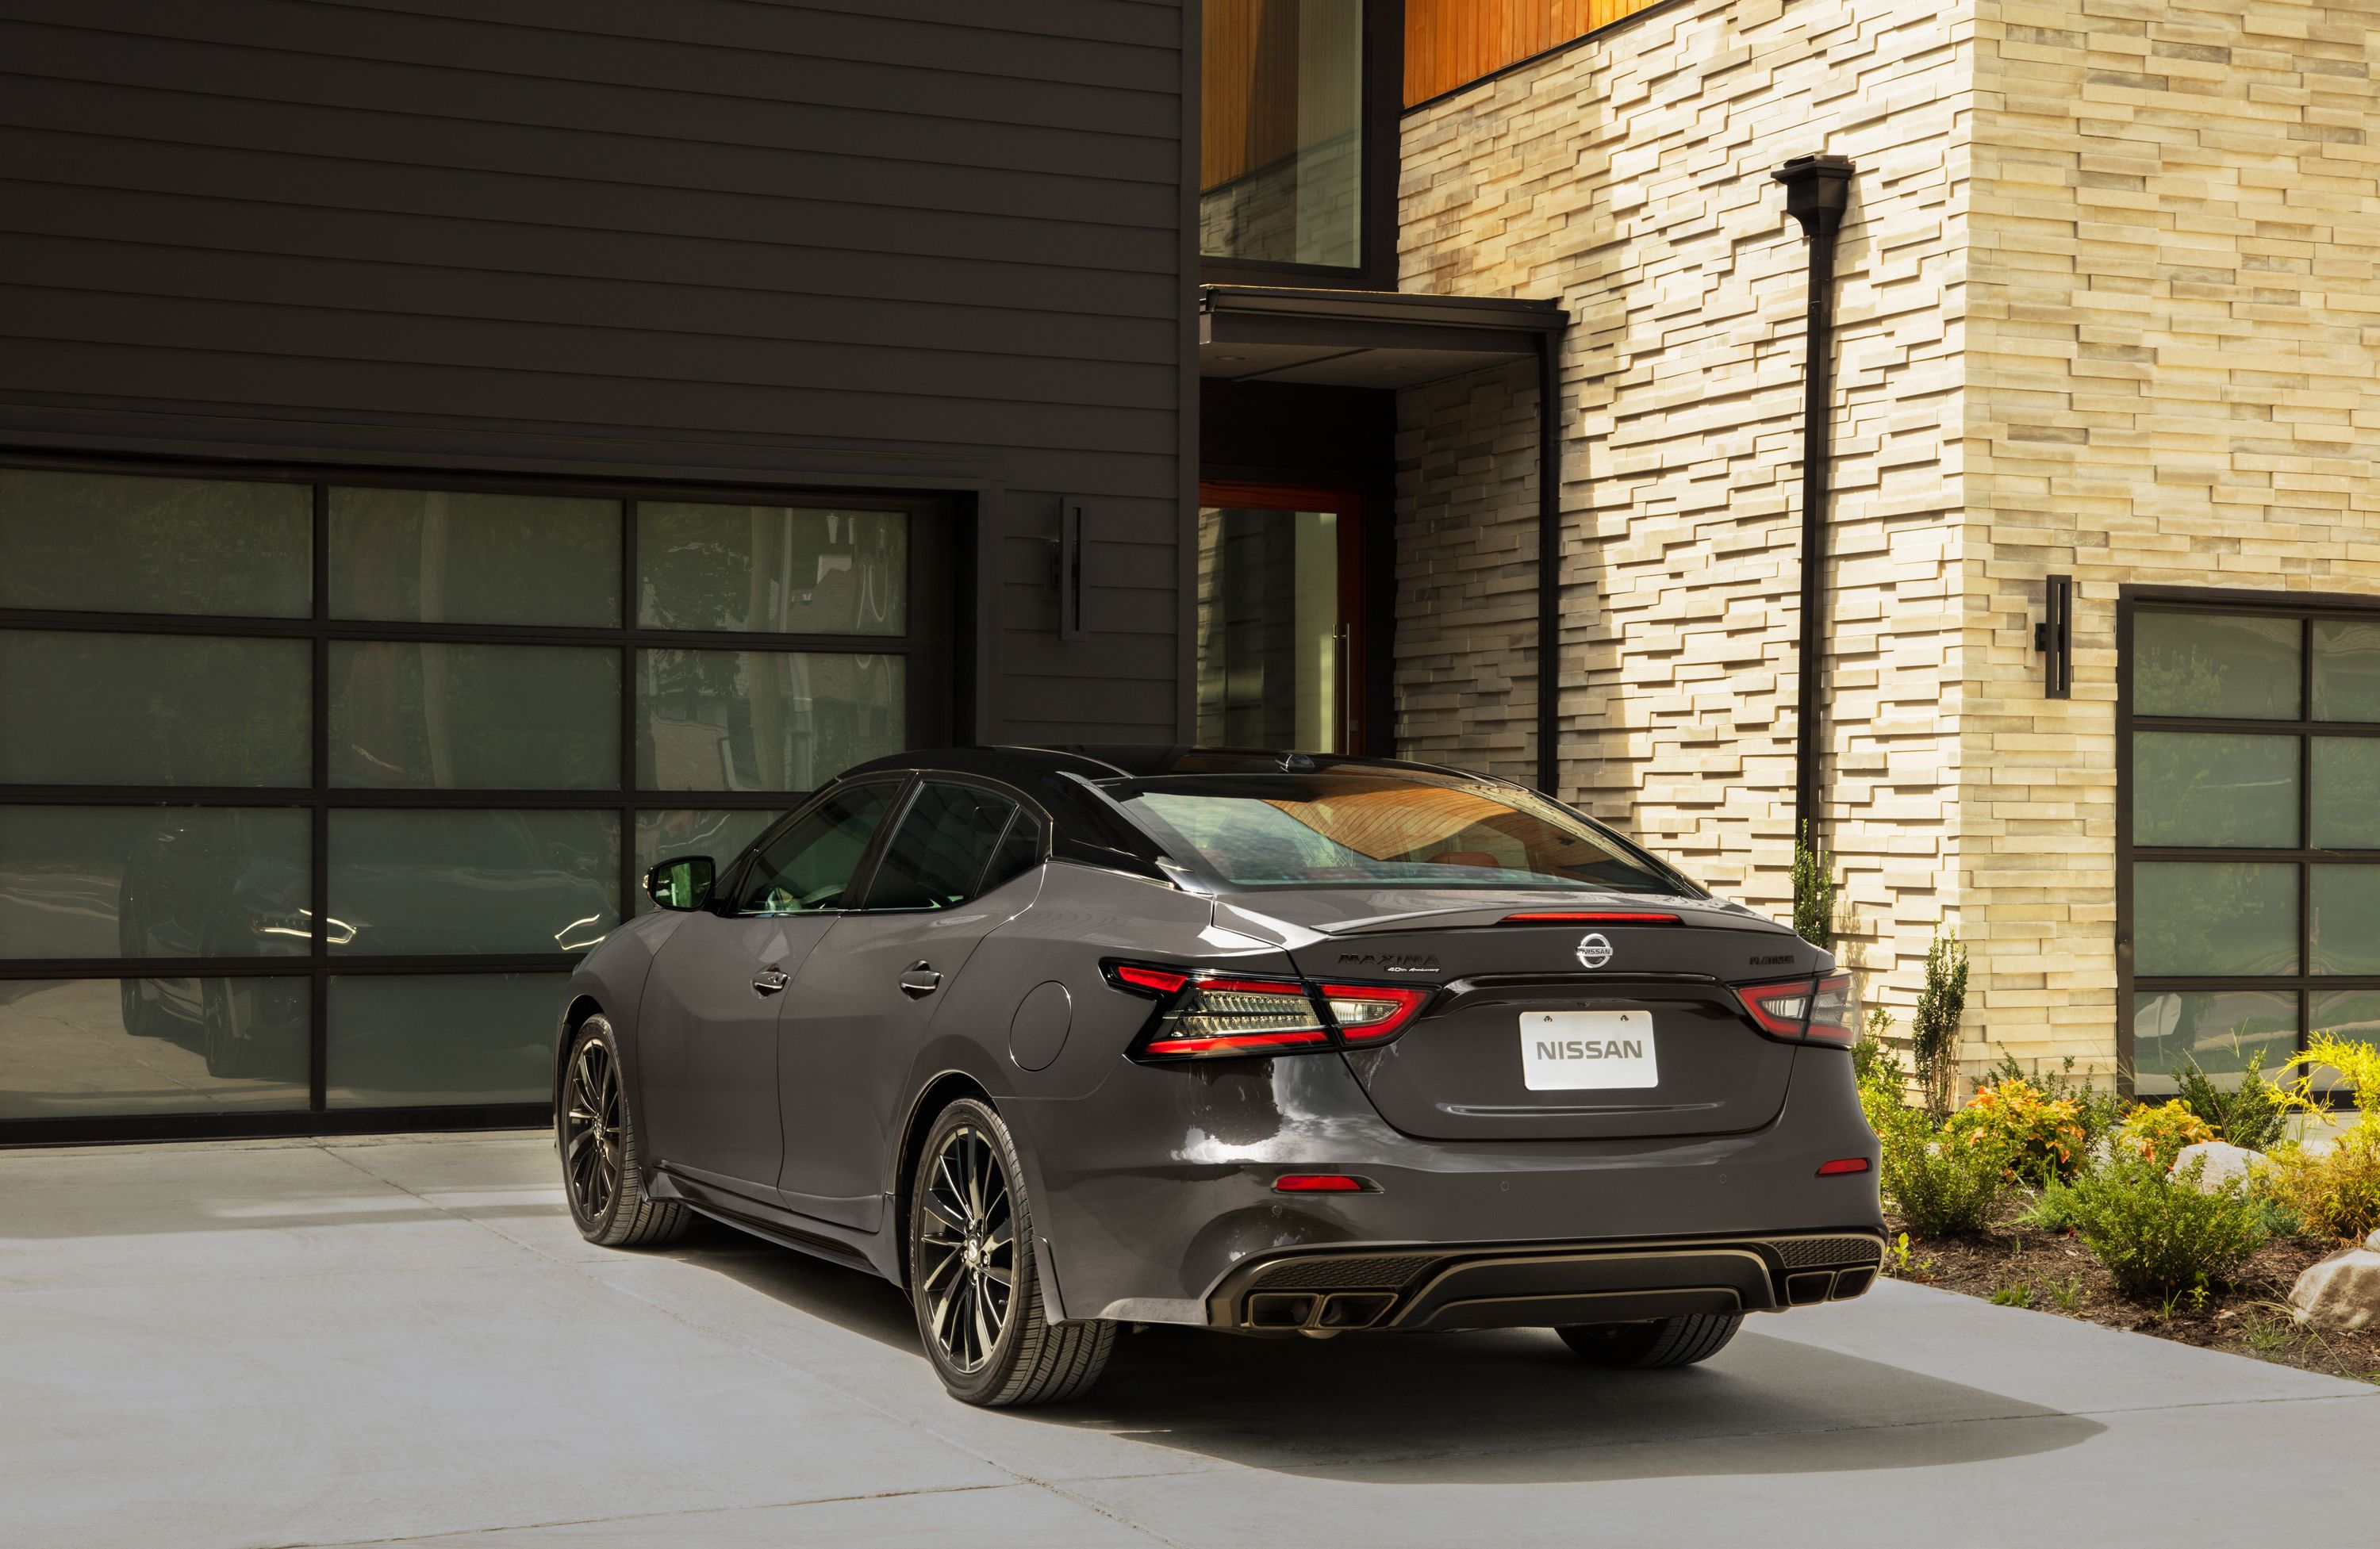 2021 Nissan Maxima Review, Pricing, and Specs